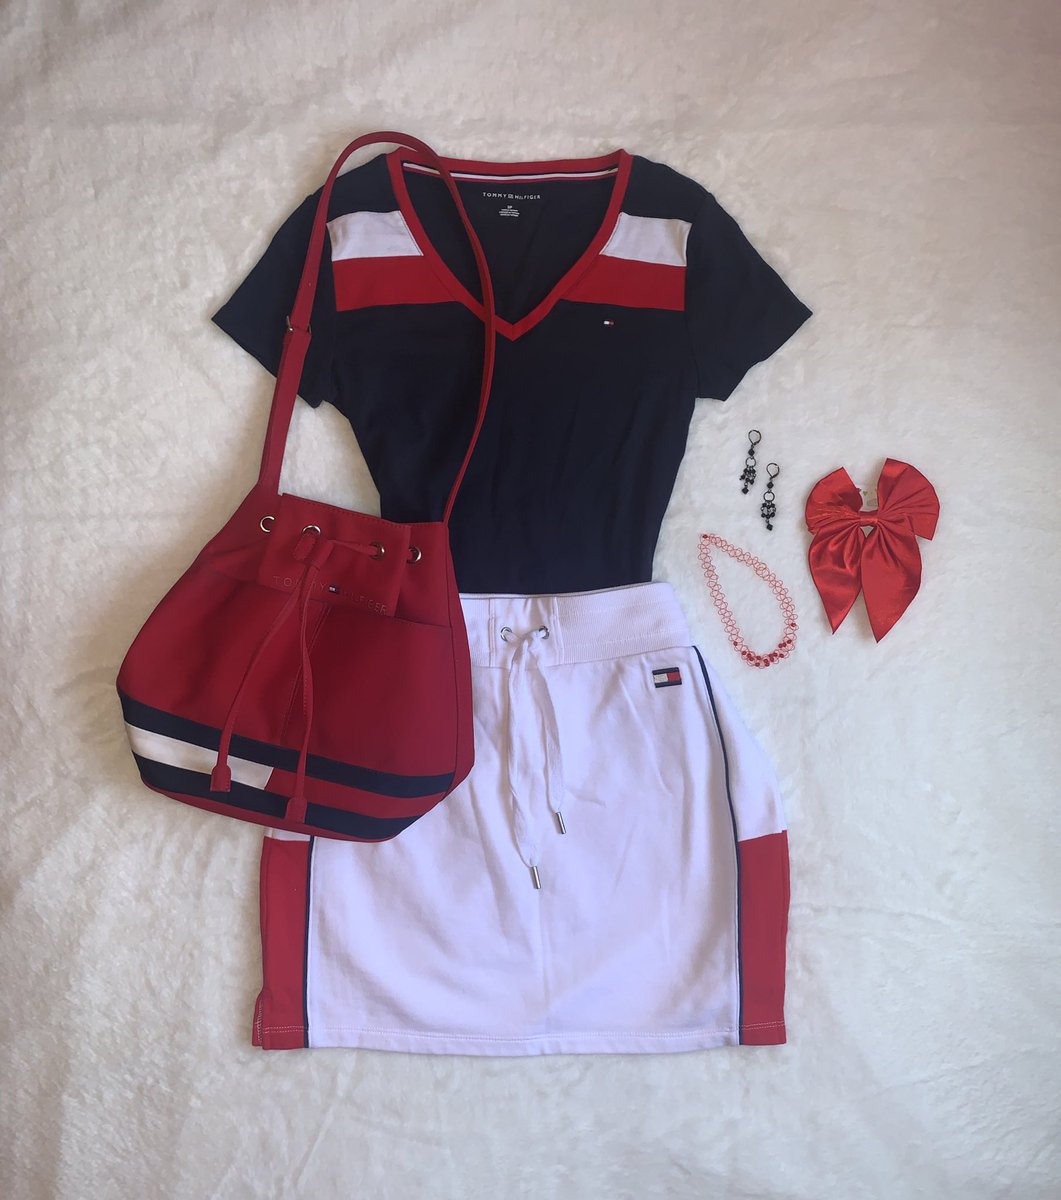 ✨Todays thrifted outfit inspo: ❤️🖤

#Thriftedfashion #Thriftedoutfit #red 
#Thriftedstyle #Secondhandoutfit #secondhandstyle #Styleinspiration #Styleinspo #style #OOTD #thrift #OotdStyle #Outfitinspo #thrifted #Fashioninspo #outfitoftheday #Fashioninspiration #TommyHilfiger